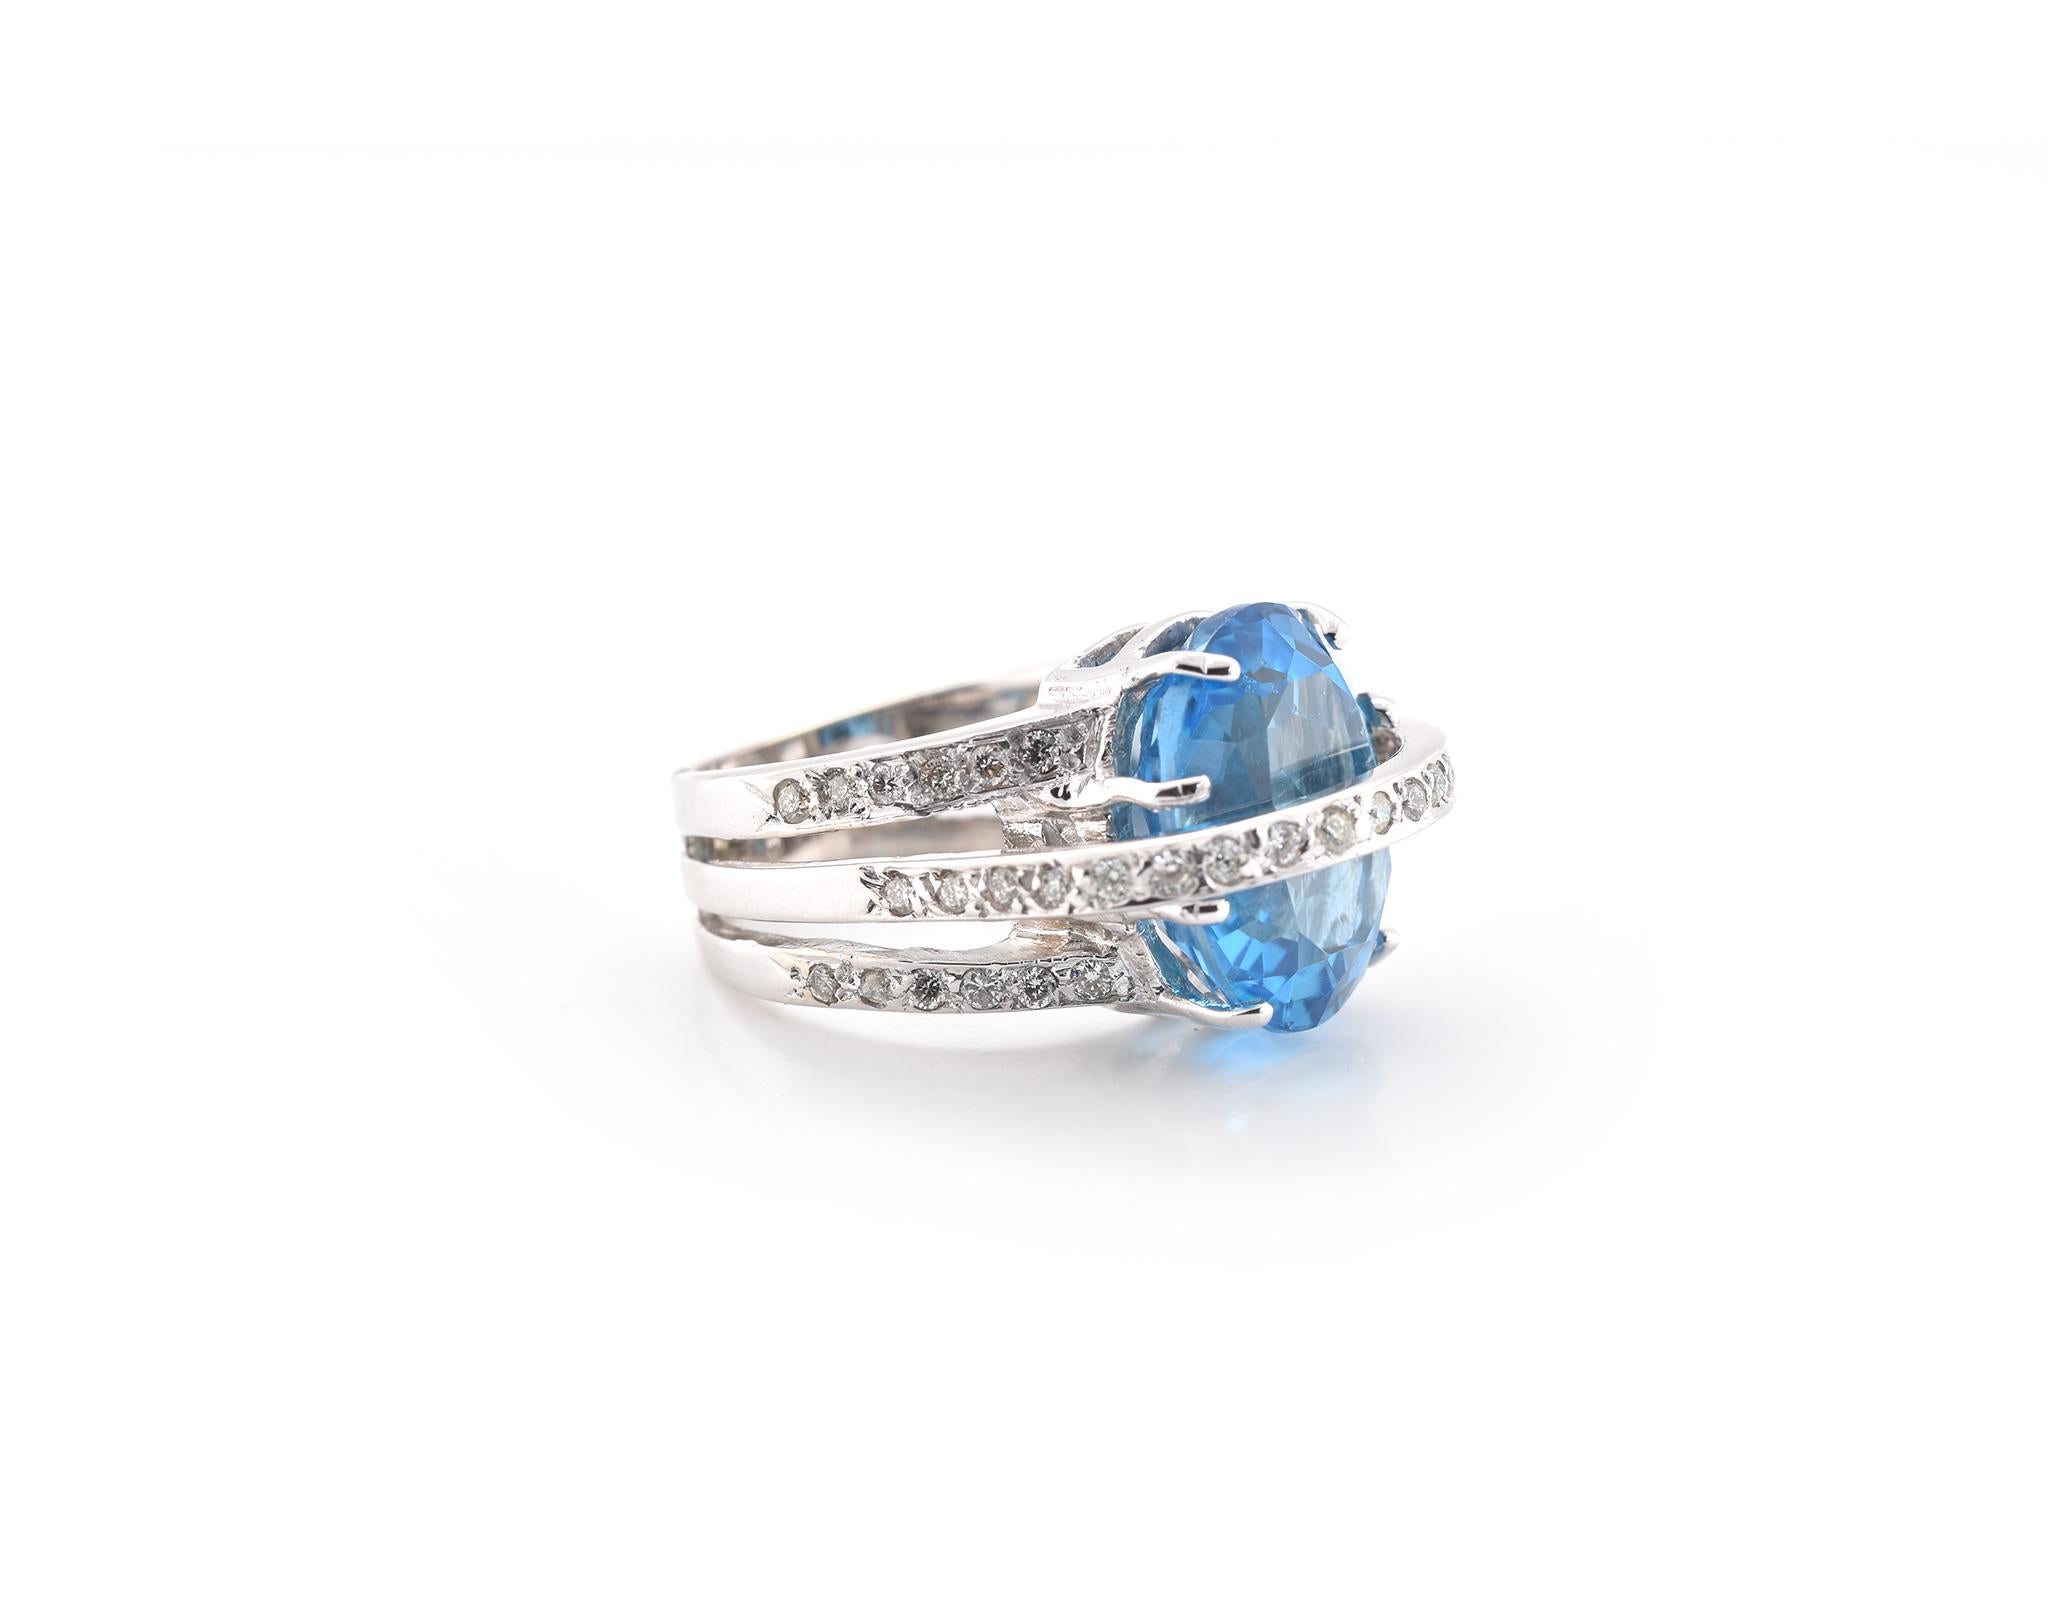 Designer: custom design
Material: 14k white gold
Blue Topaz: 1 oval faceted cut blue topaz = 9.50ct
Diamonds: 48 round brilliant cuts = 0.82cttw
Color: H-J
Clarity: SI2
Ring Size: 2 ¼ (please allow two additional shipping days for sizing